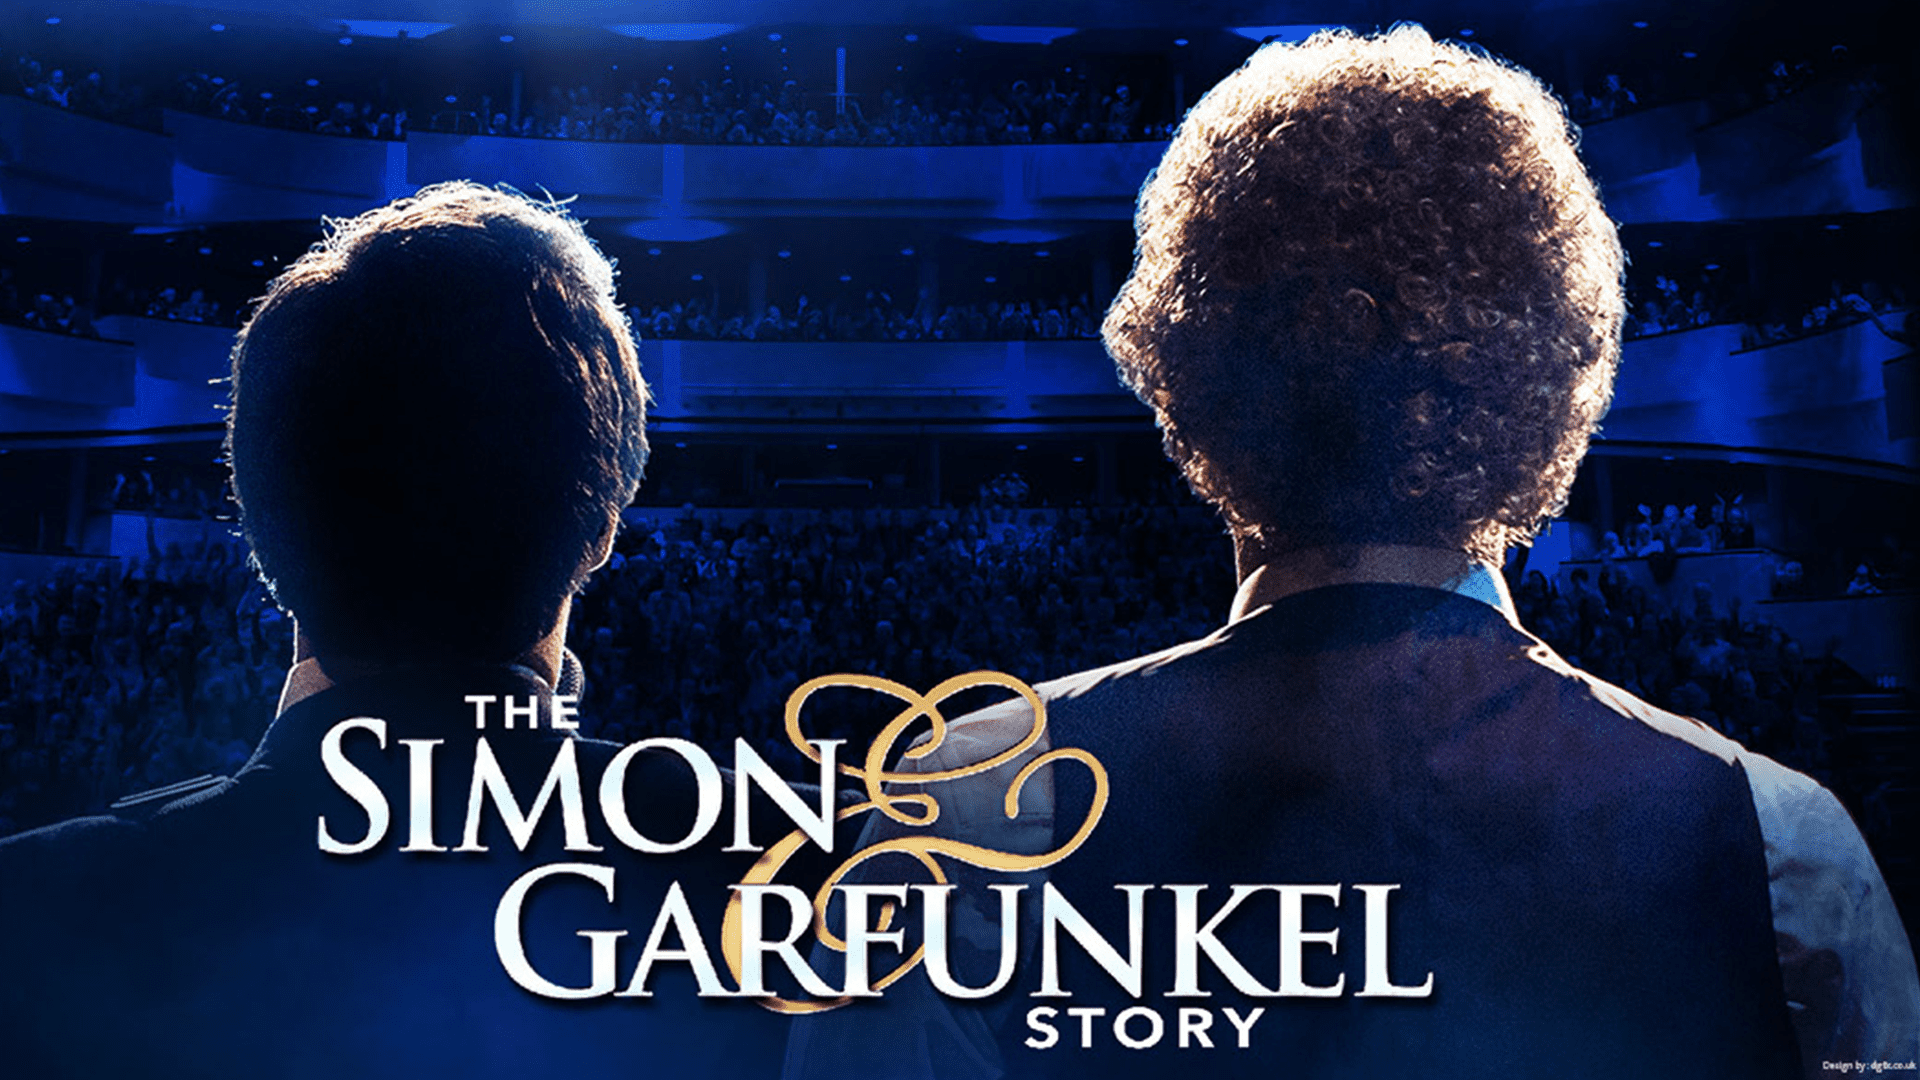 The Simon & Garfunkel Story is coming to Music Hall in March